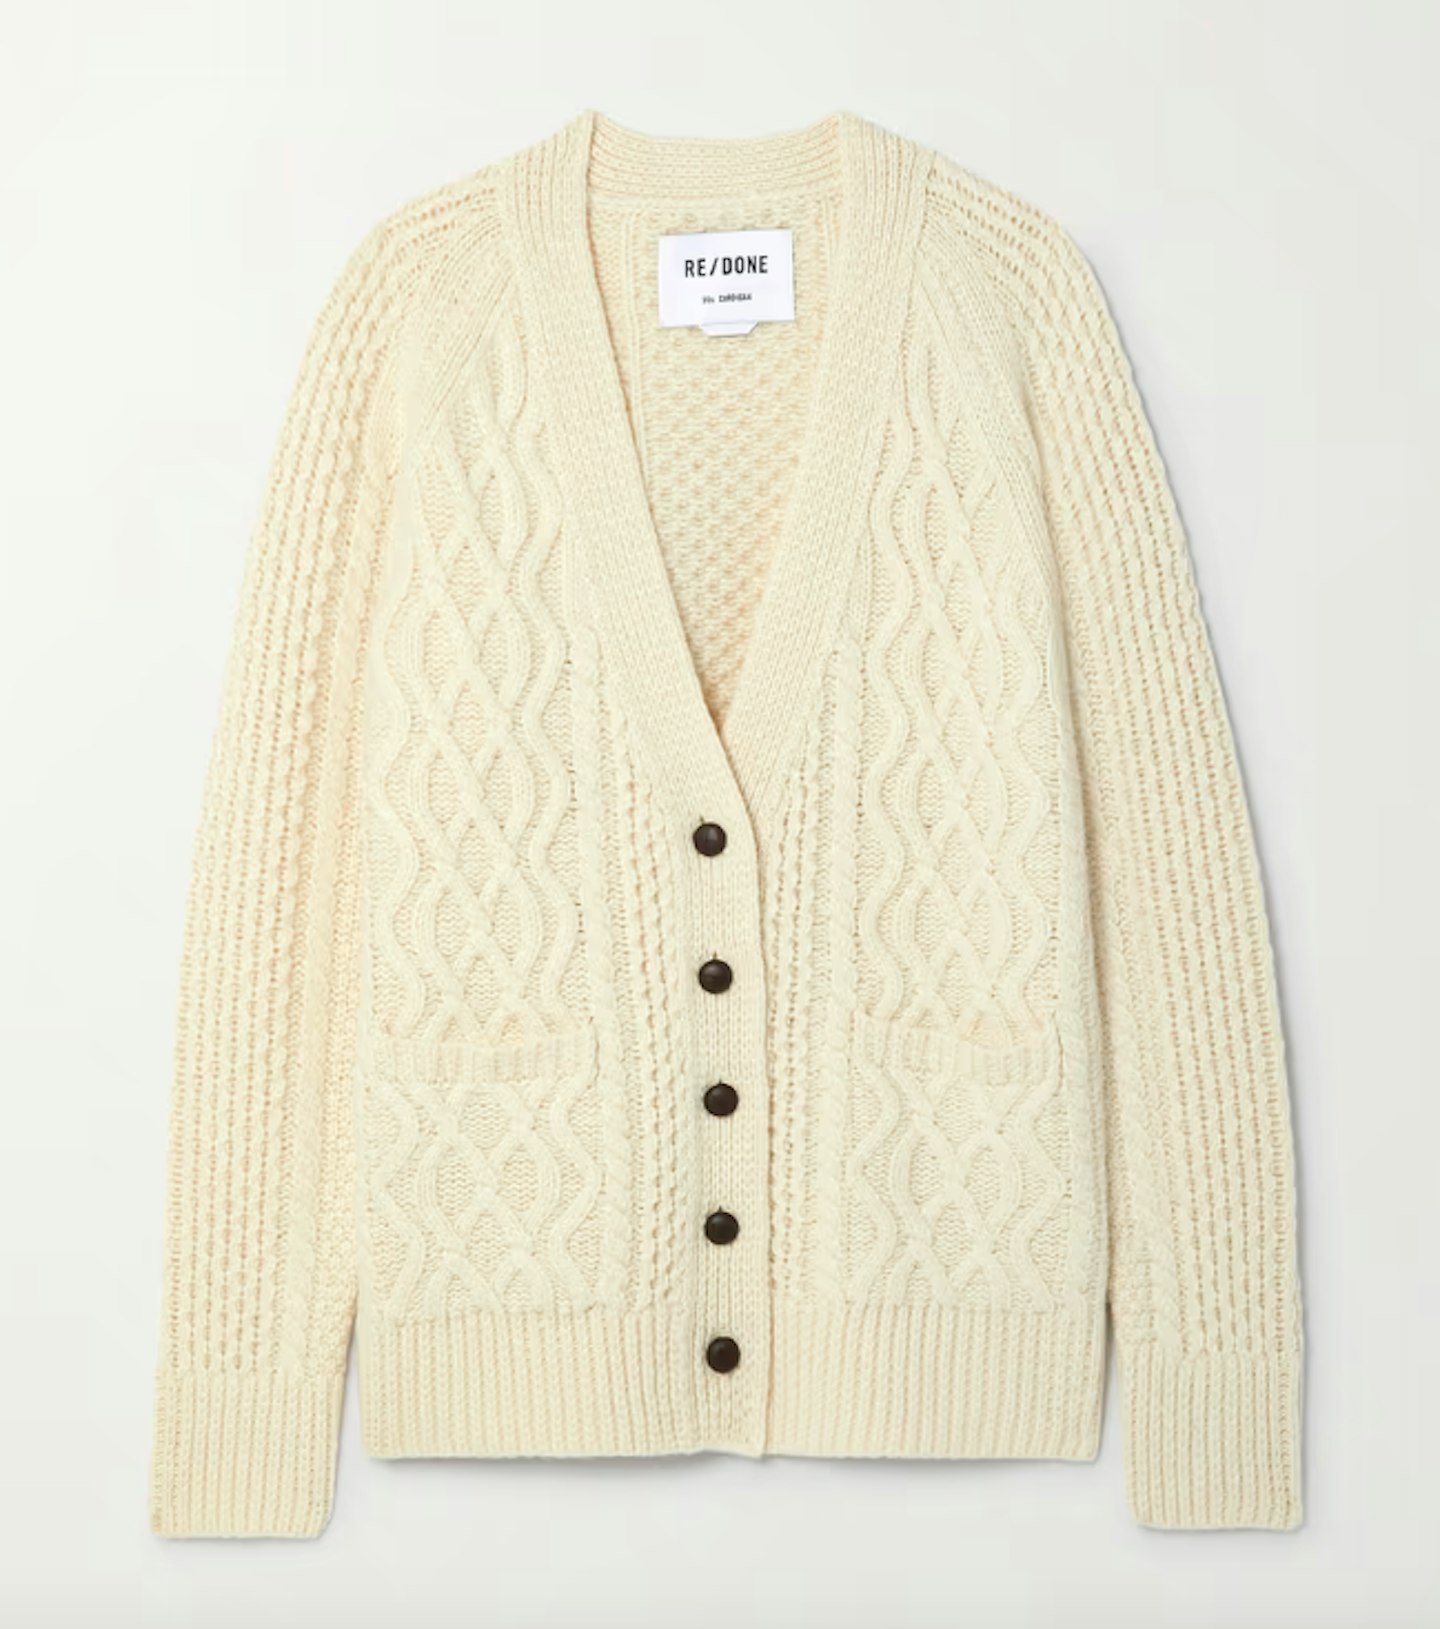 Re/Done, 90s Oversized Cable-Knit Wool Cardigan, WAS £485 NOW £145.50